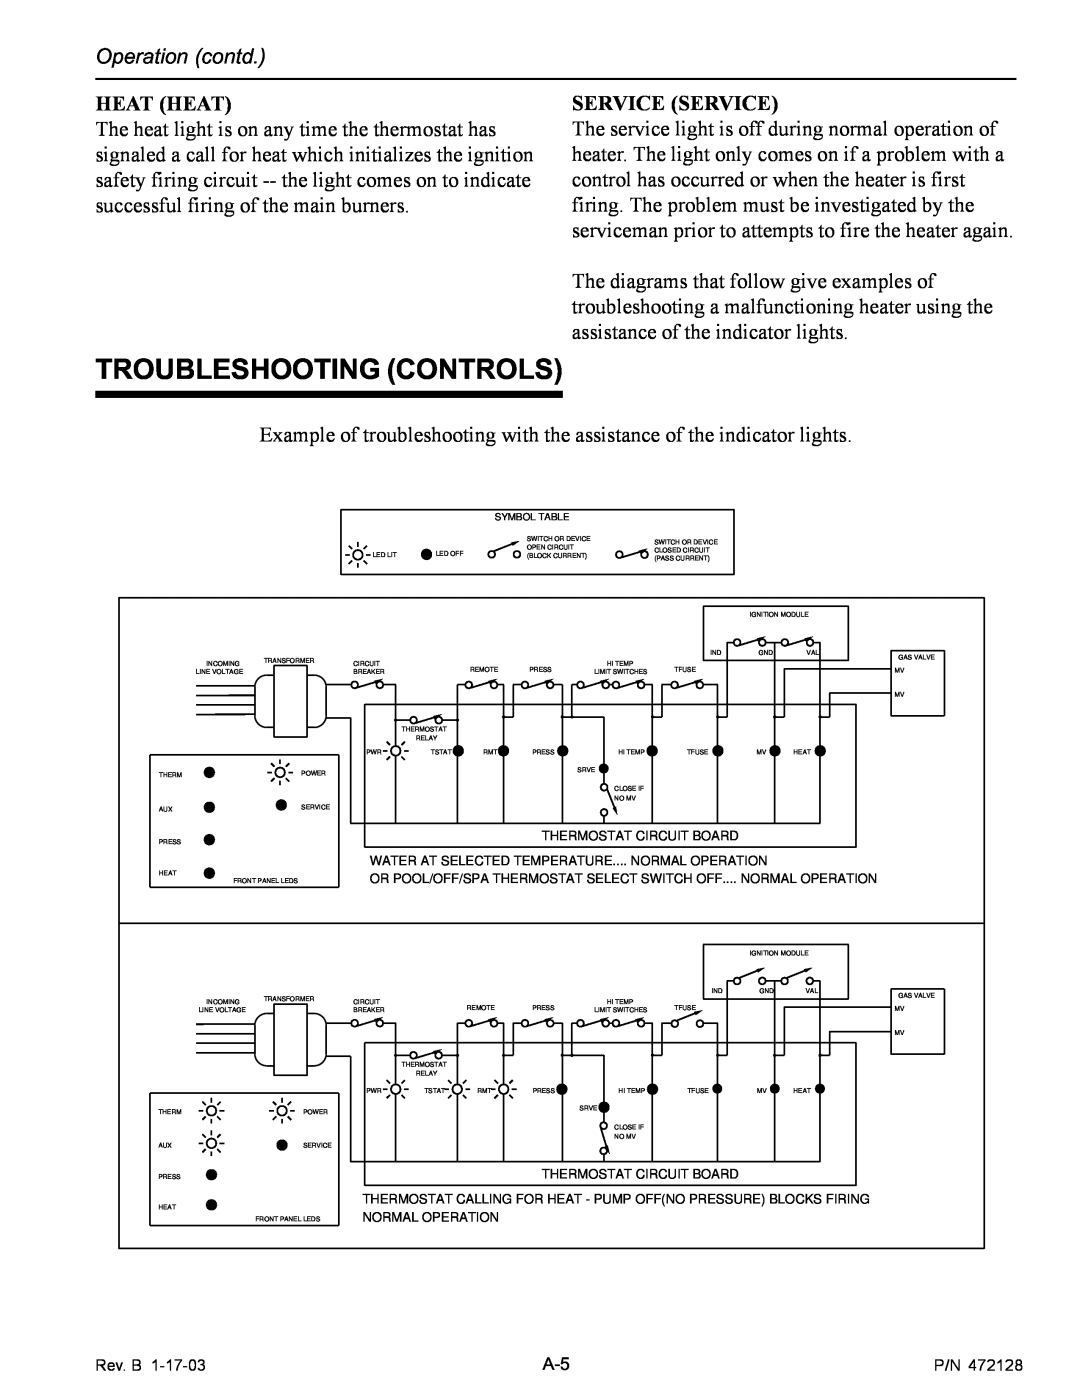 Pentair CH installation manual Troubleshooting Controls, Heat Heat, Service Service 